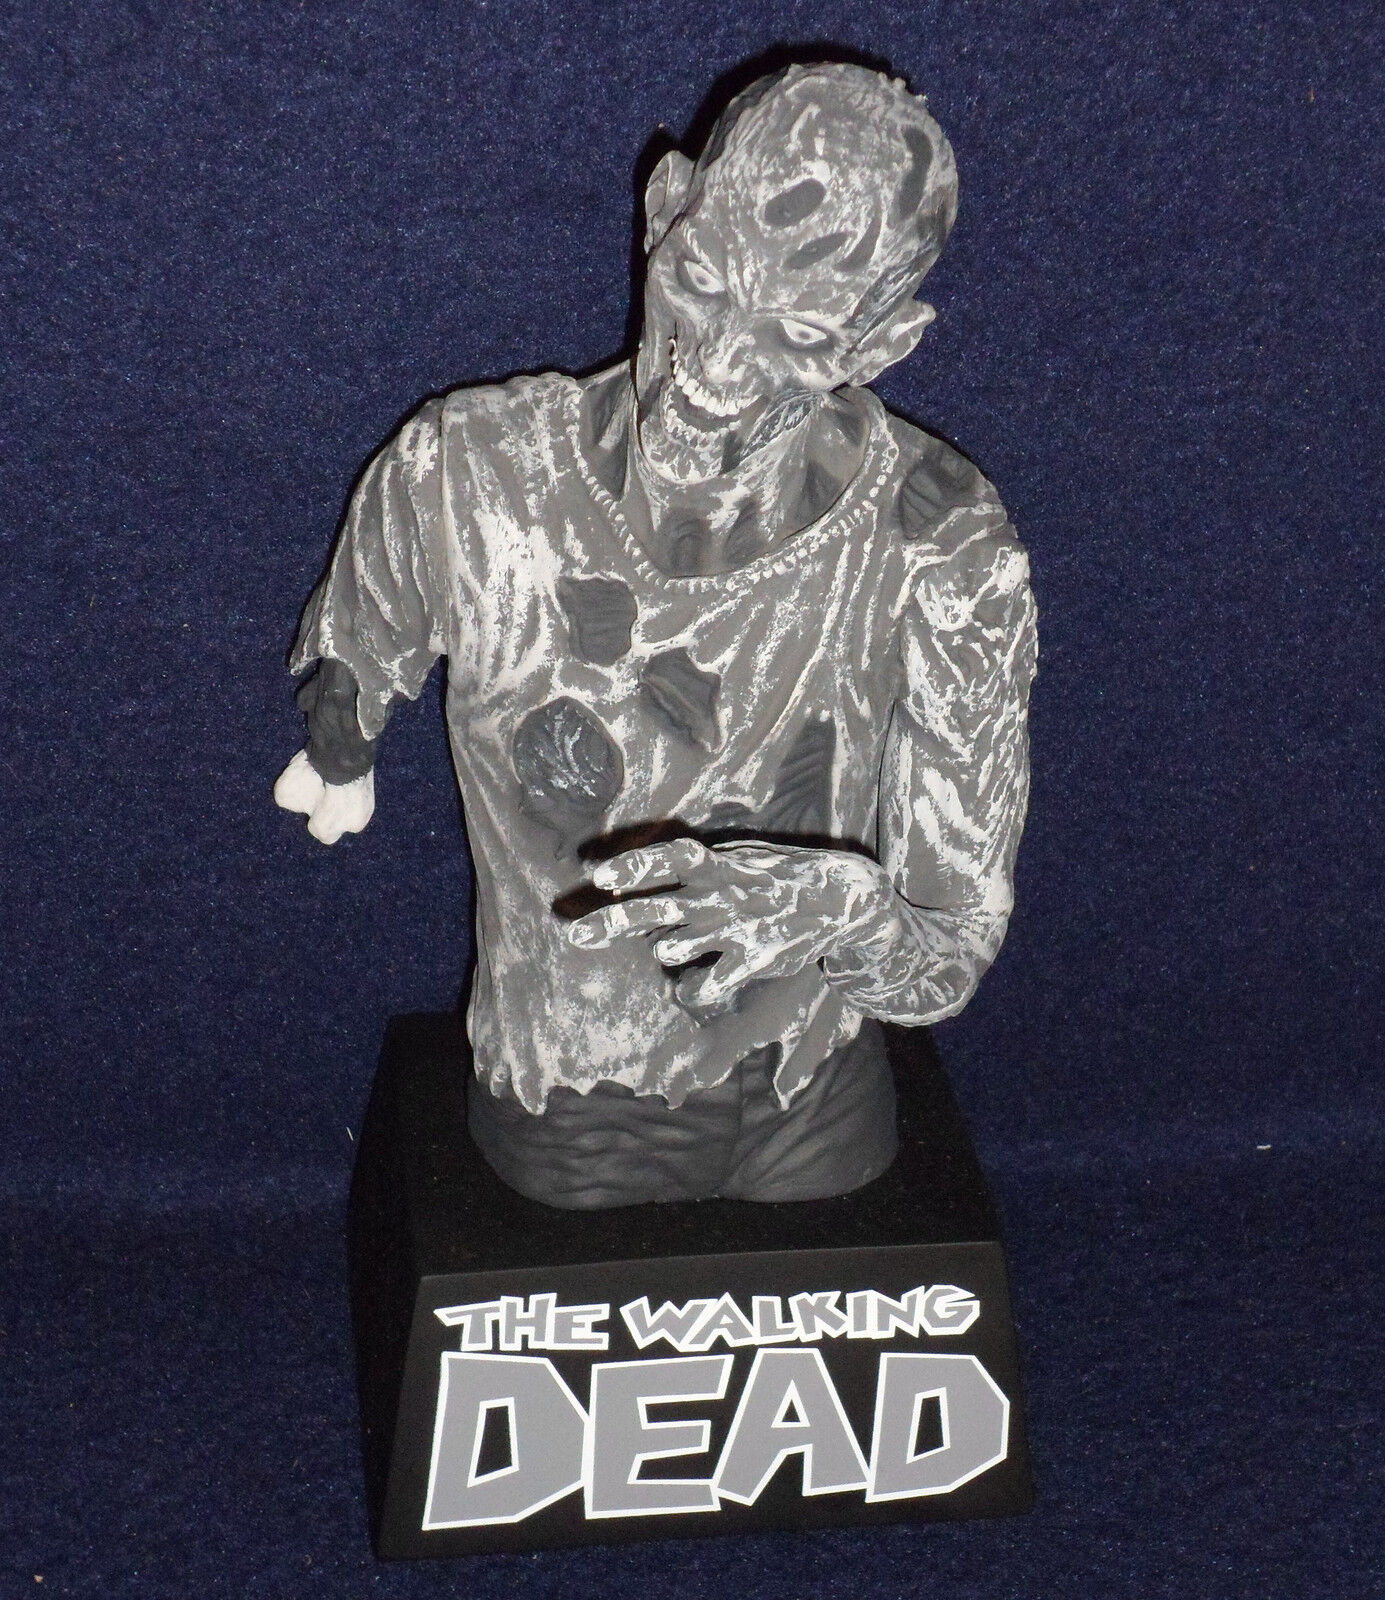 NYCC 2012 Exclusive WALKING DEAD ZOMBIE Black & White Bust Bank